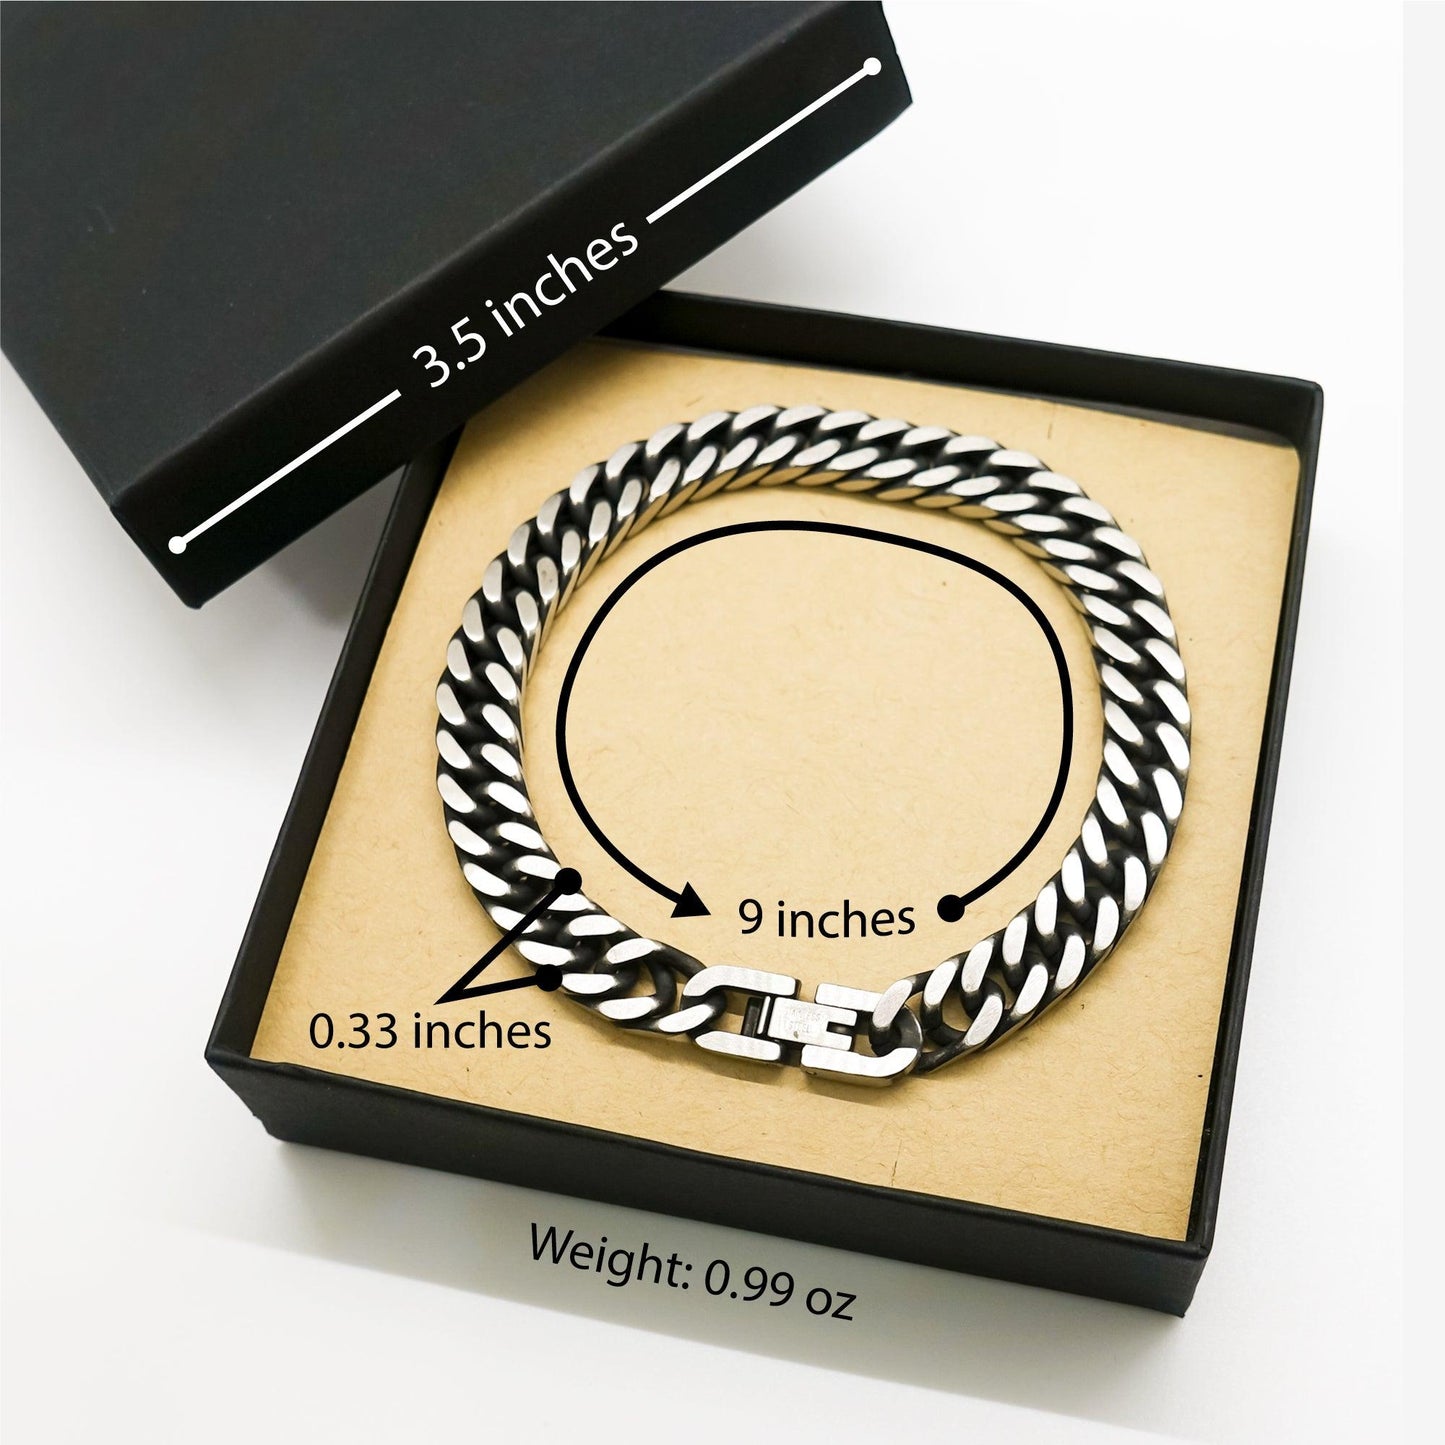 Sarcastic Correctional Officer Cuban Link Chain Bracelet Gifts, Christmas Holiday Gifts for Correctional Officer Birthday Message Card, Correctional Officer: Because greatness is woven into the fabric of every day, Coworkers, Friends - Mallard Moon Gift Shop